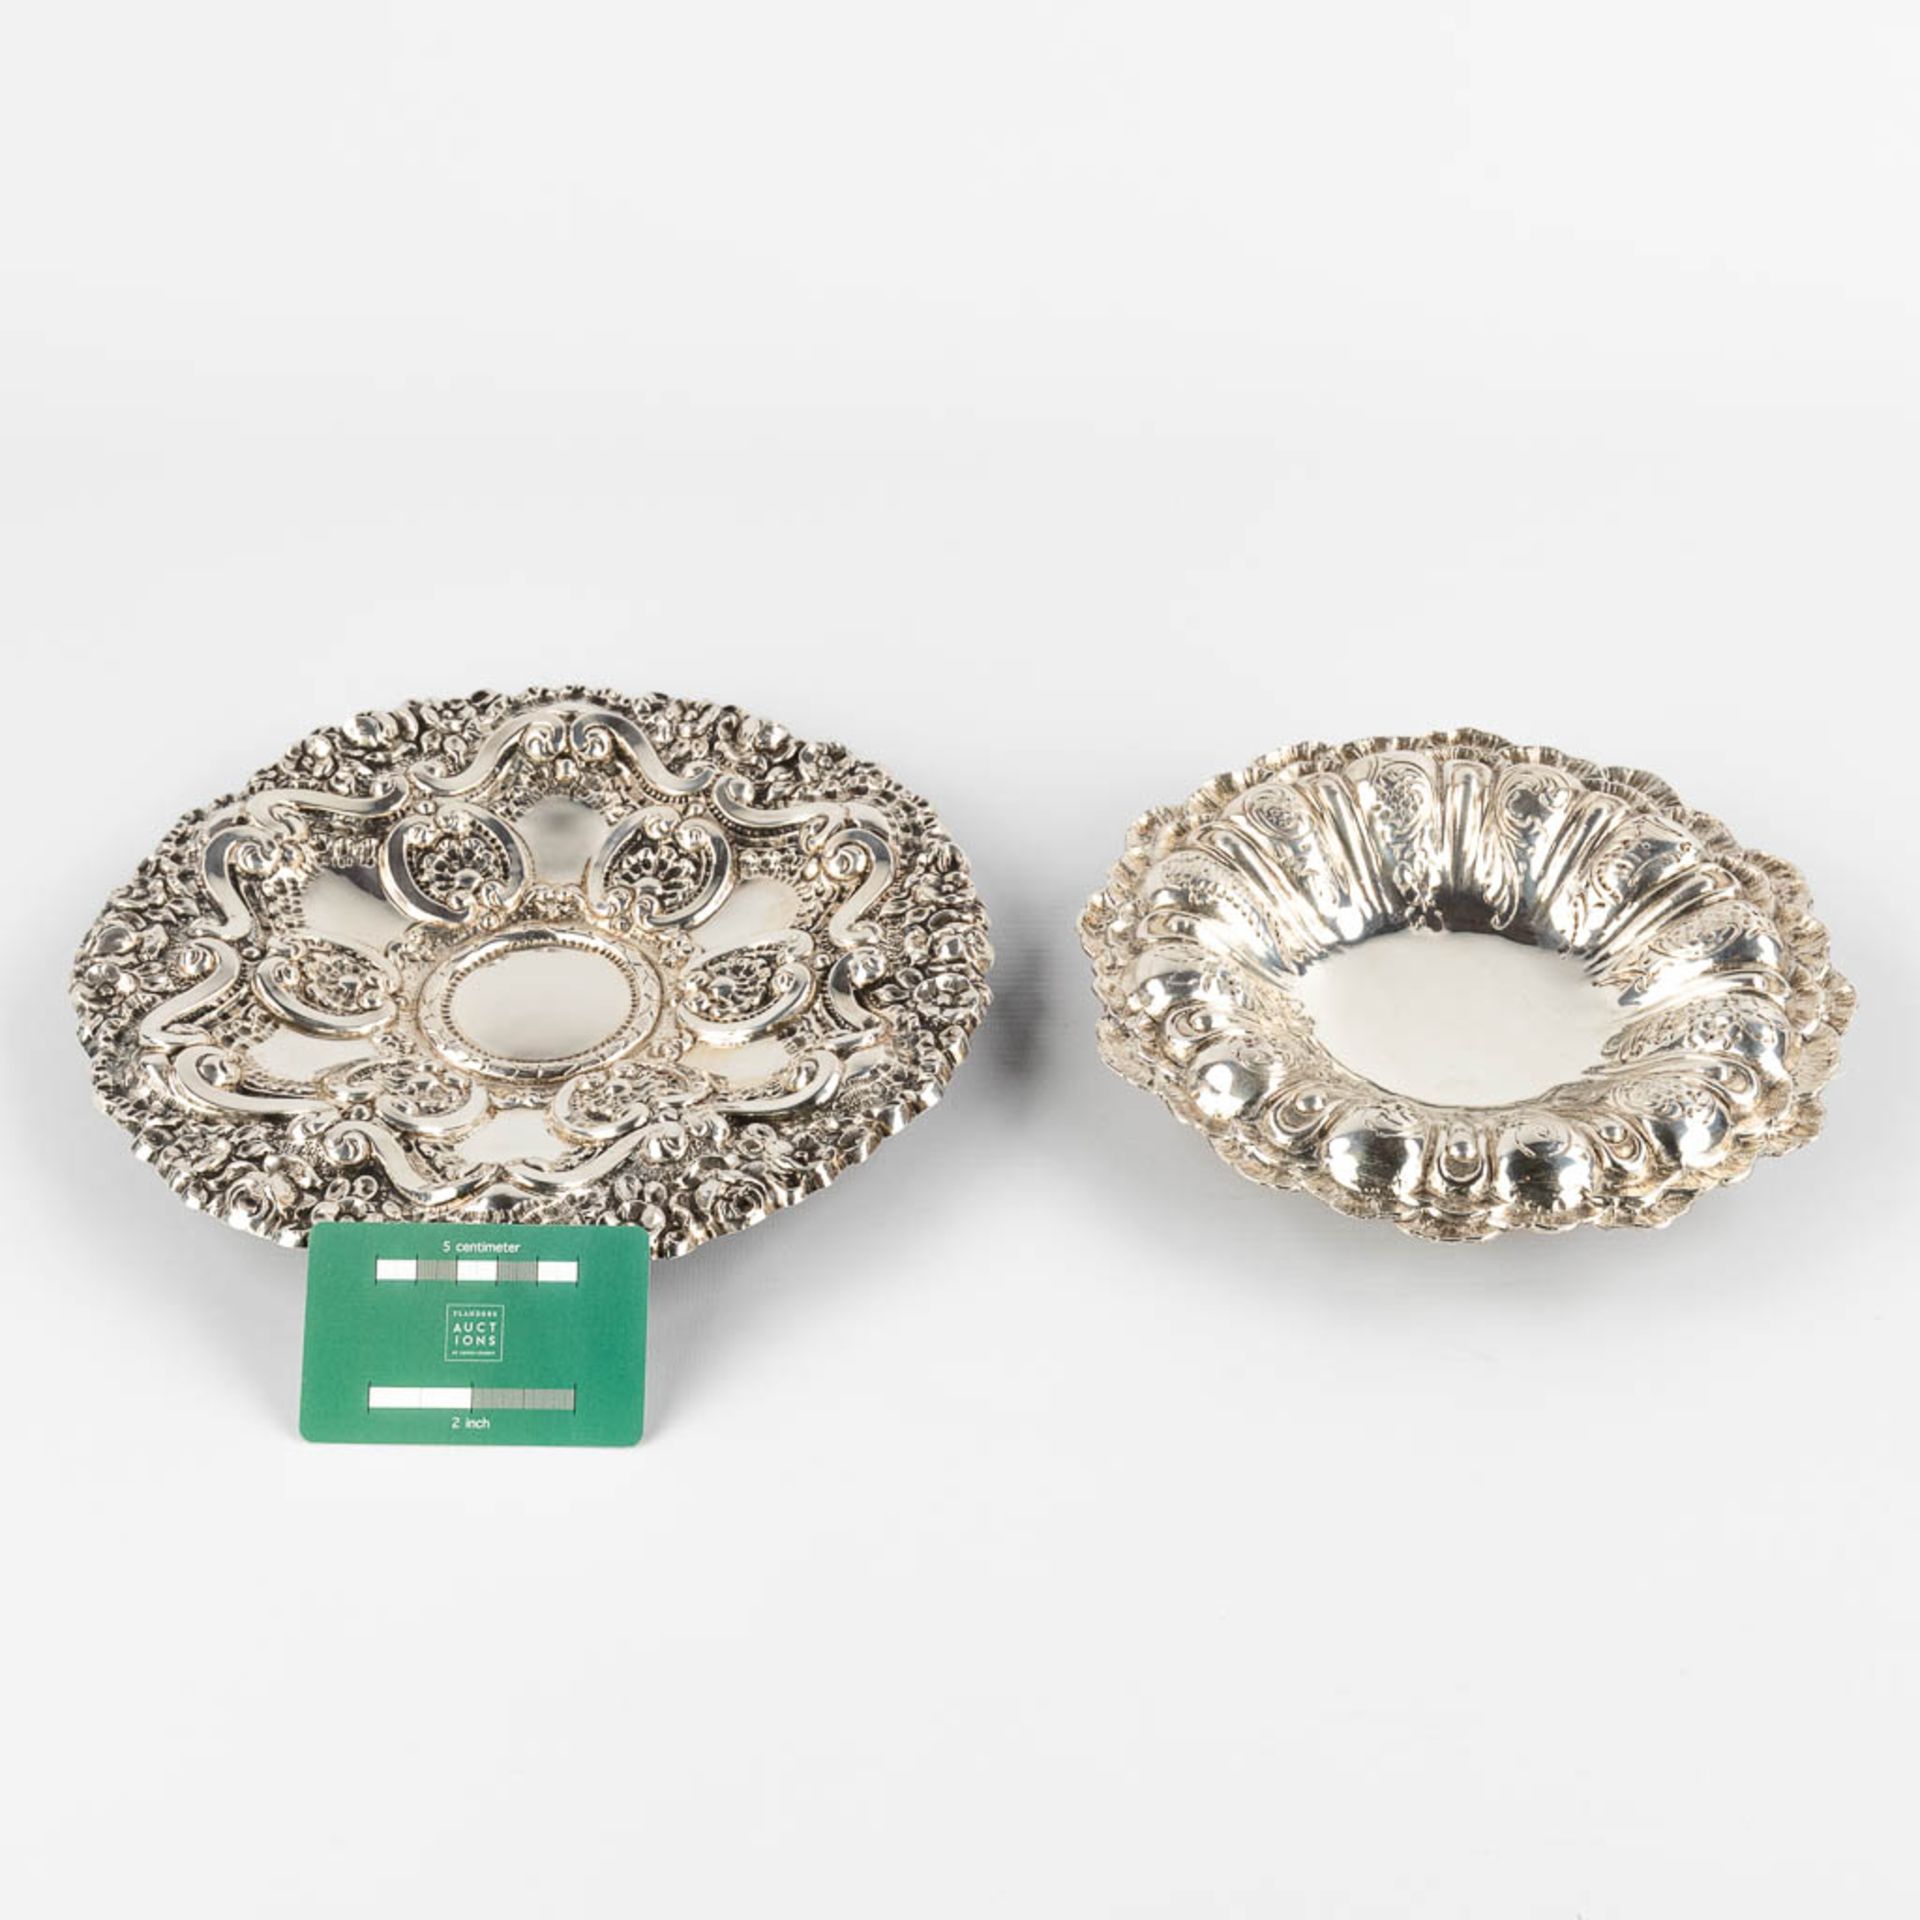 A bowl and an 'Assiette volante', silver, 433g. (D:26 cm) - Image 2 of 9